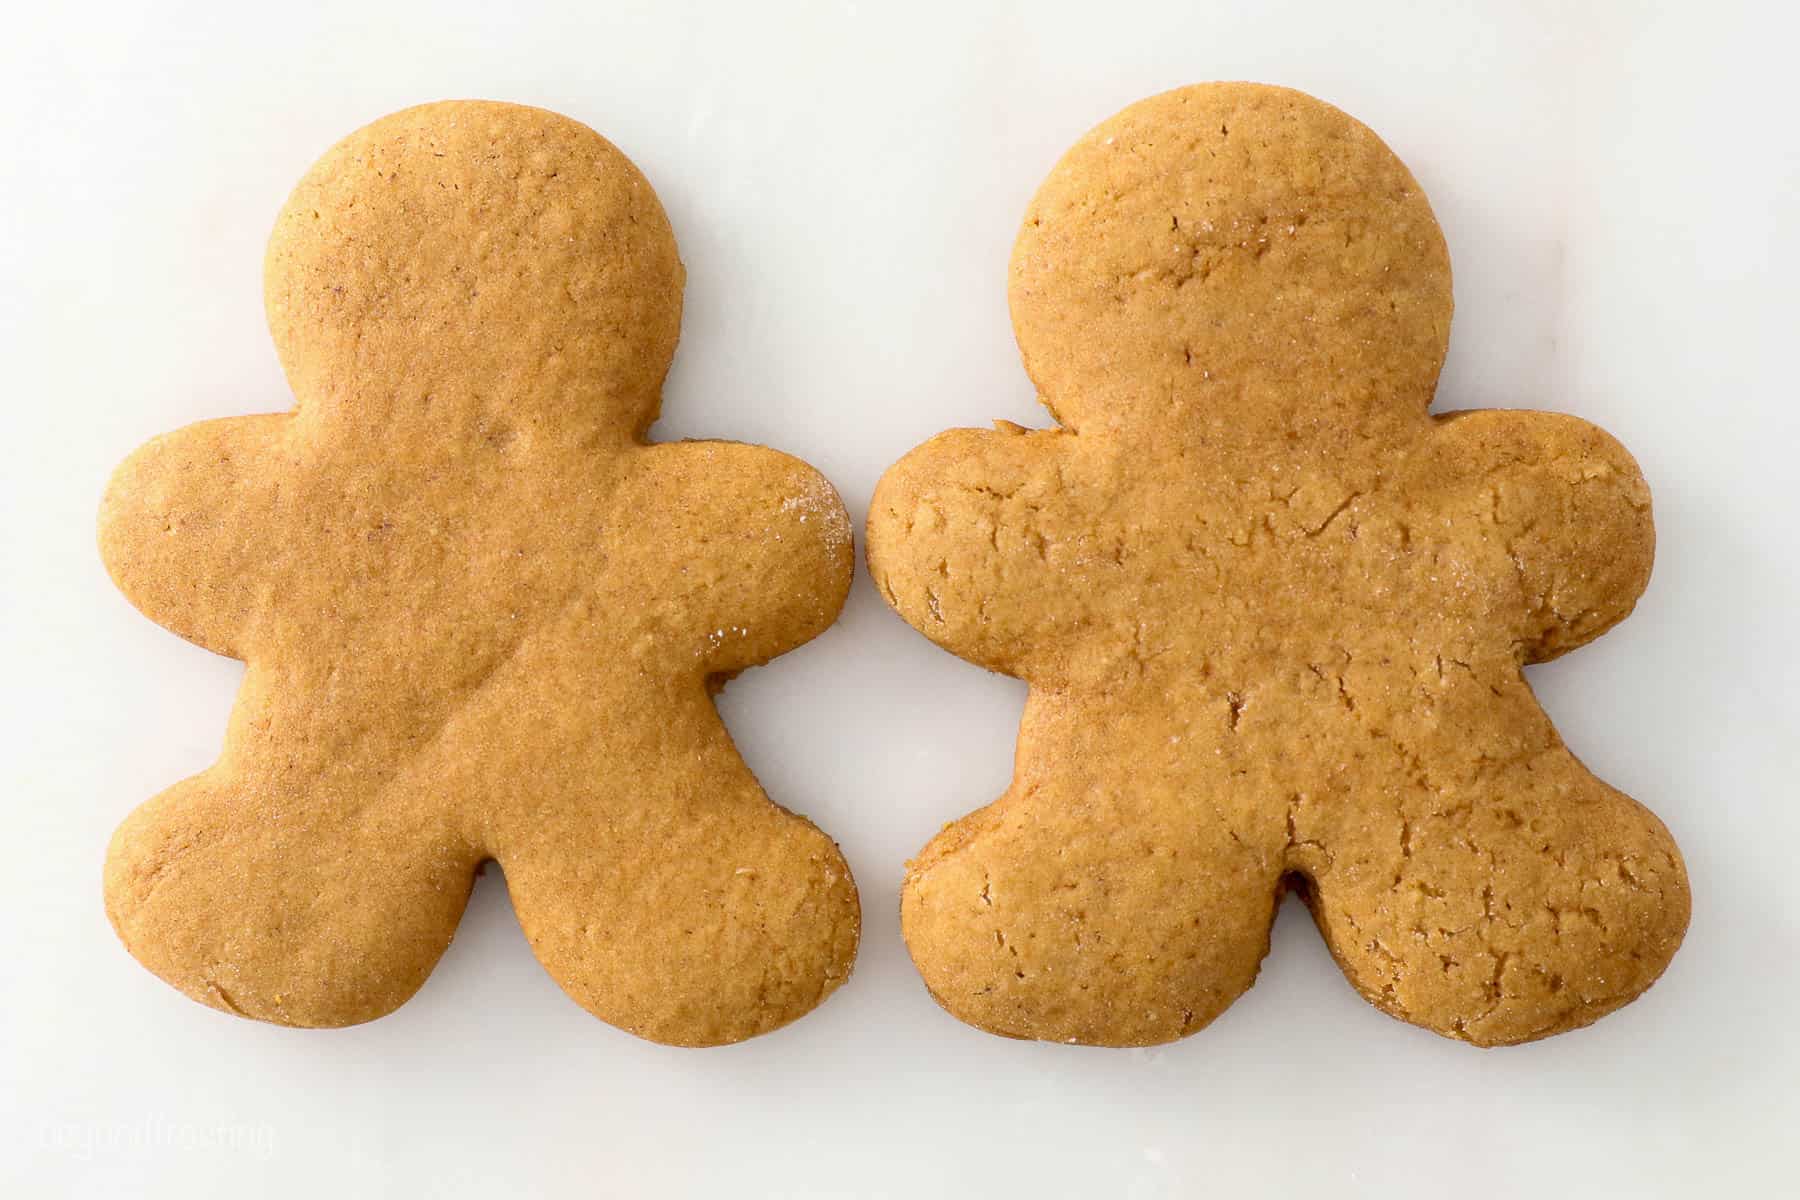 Two gingerbread men cookies laying side by side on a kitchen countertop